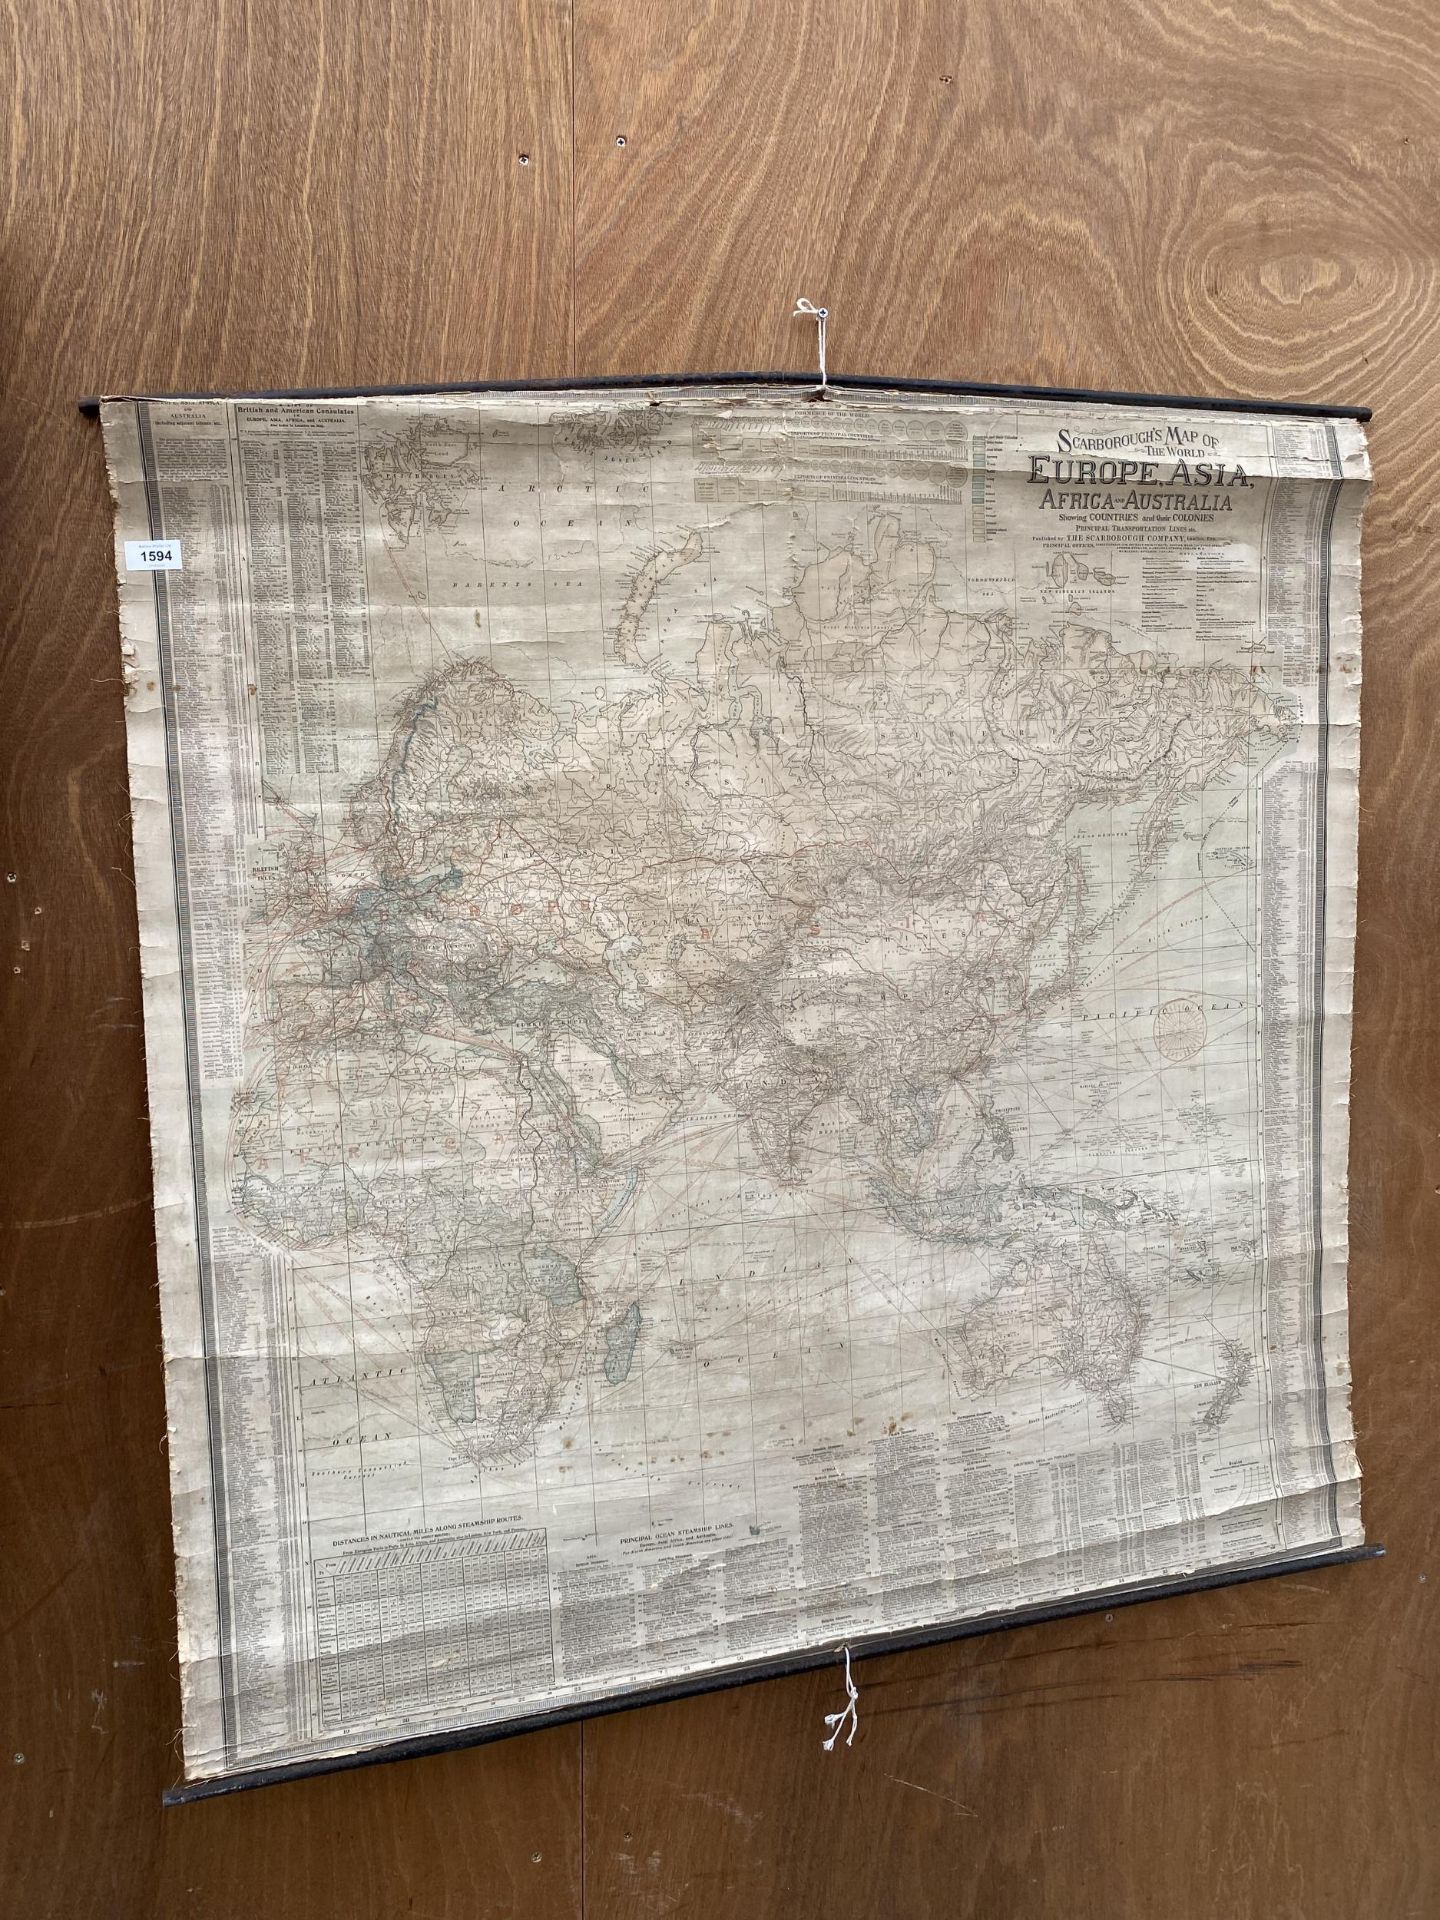 A VINTAGE SCROLL MAP OF EUROPE, ASIA, AFRICA AND AUSTRALLIA